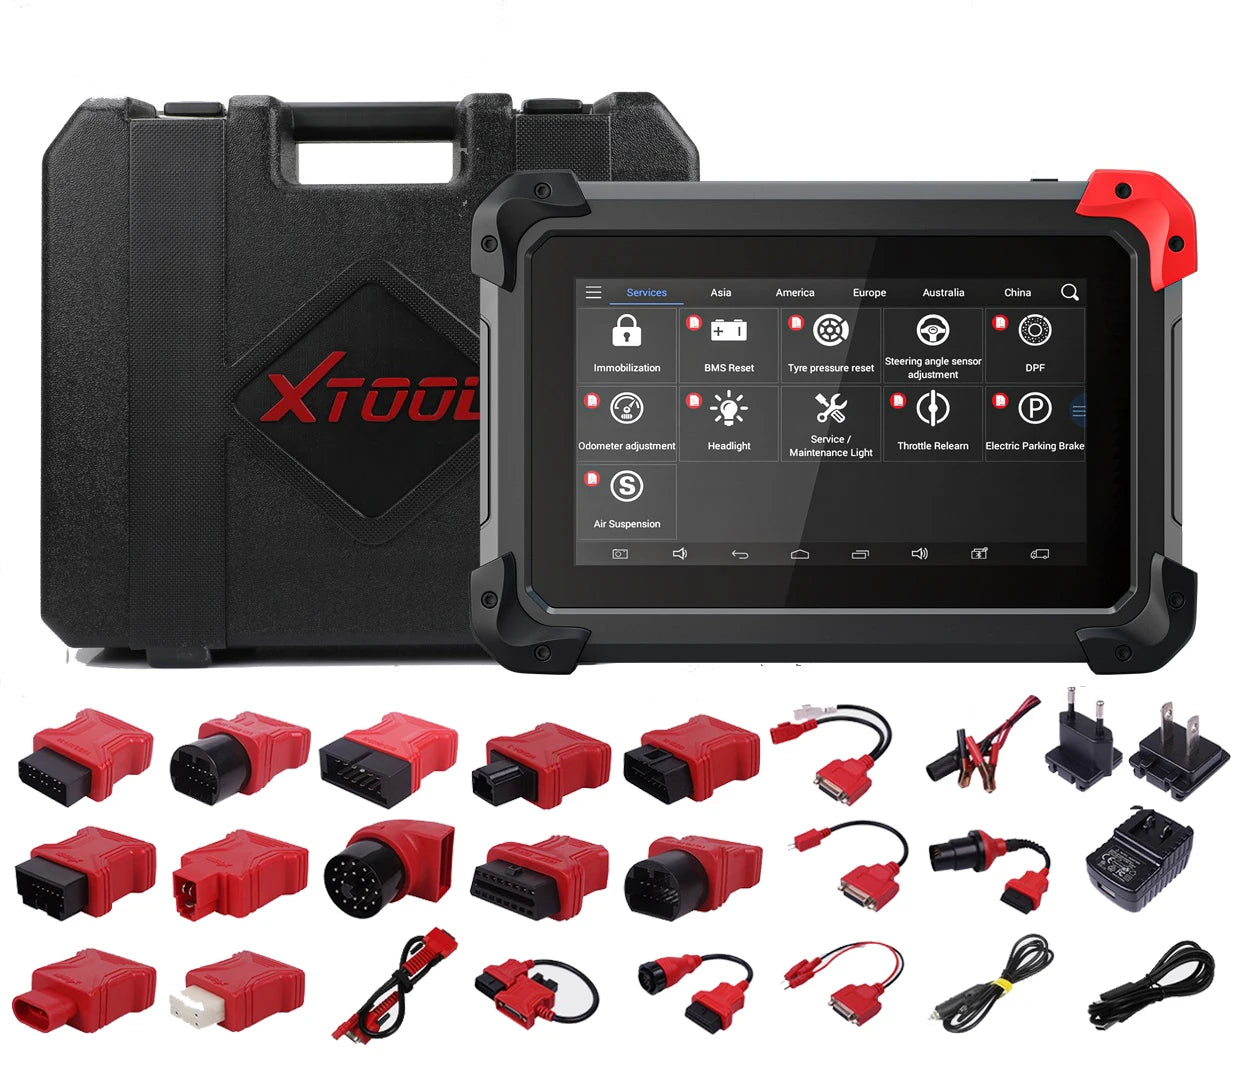 XTOOL EZ400PRO All System Car Diagnostic Tools Action Test ECU Coding 31+ Services Key Programming Tool OBD2 Scanner Free Update - Dynamex